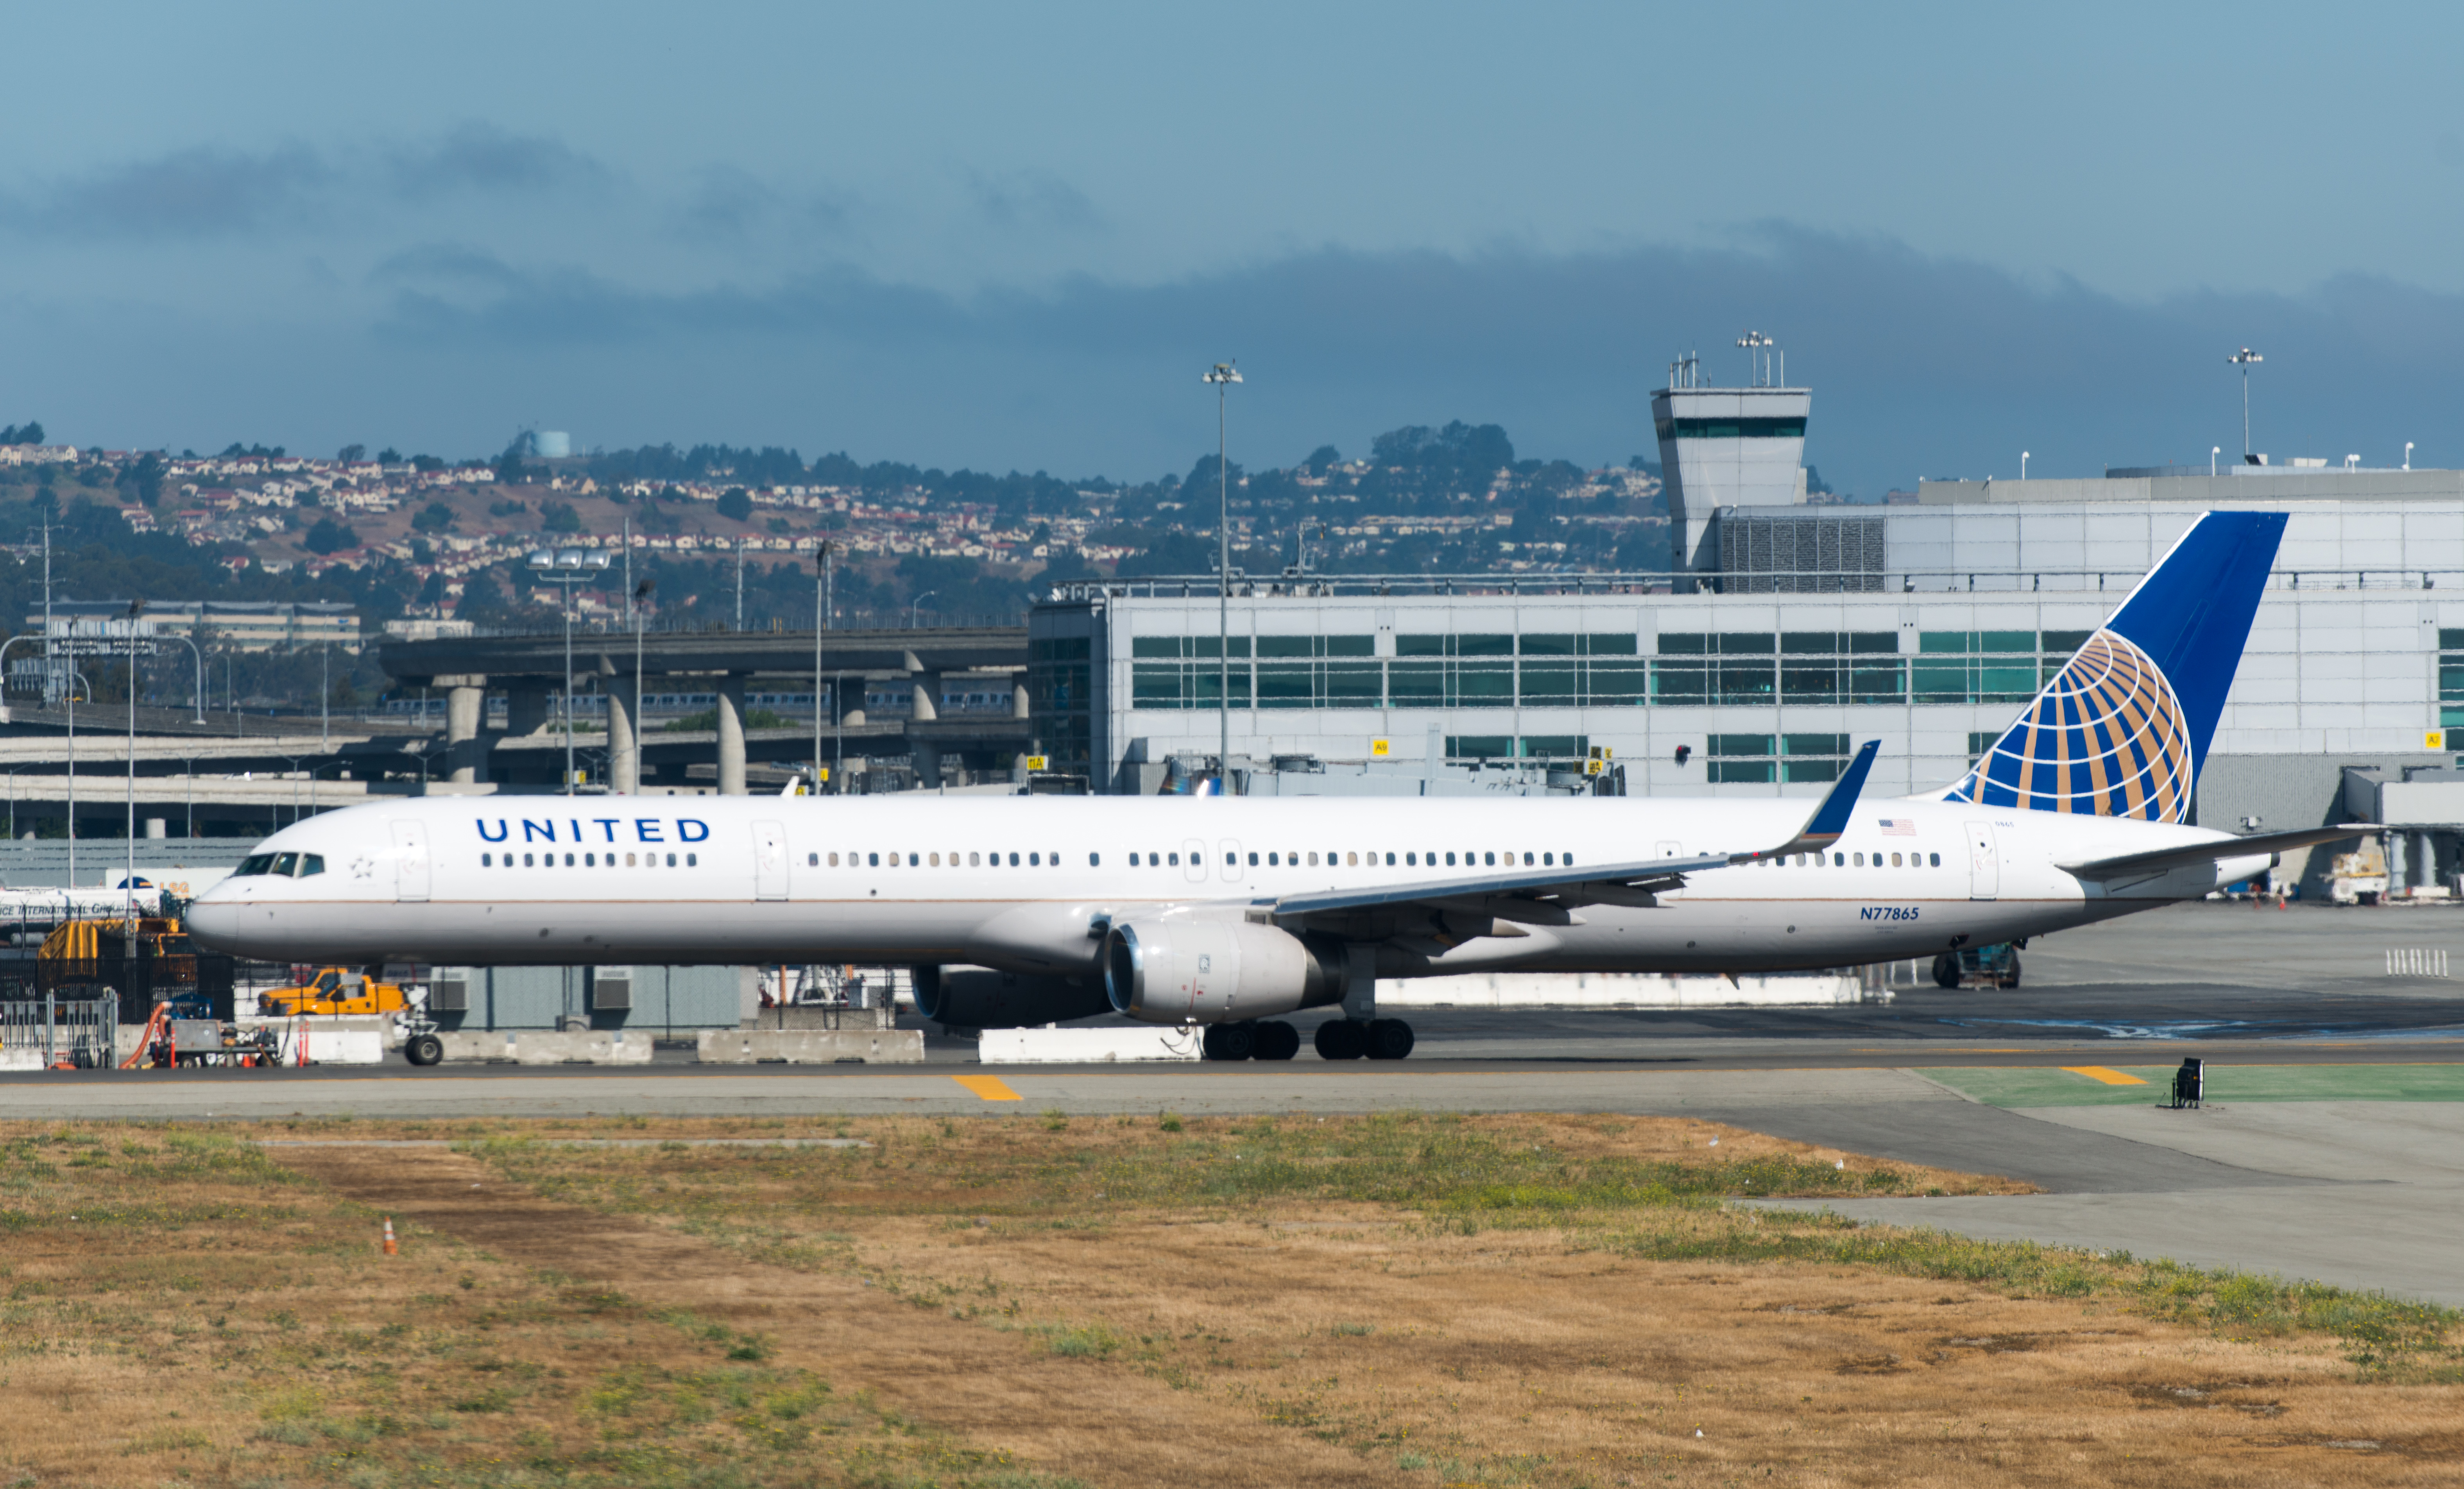 Profile view of united airlines b757-300 (n77865) on tarmac at sfo photo